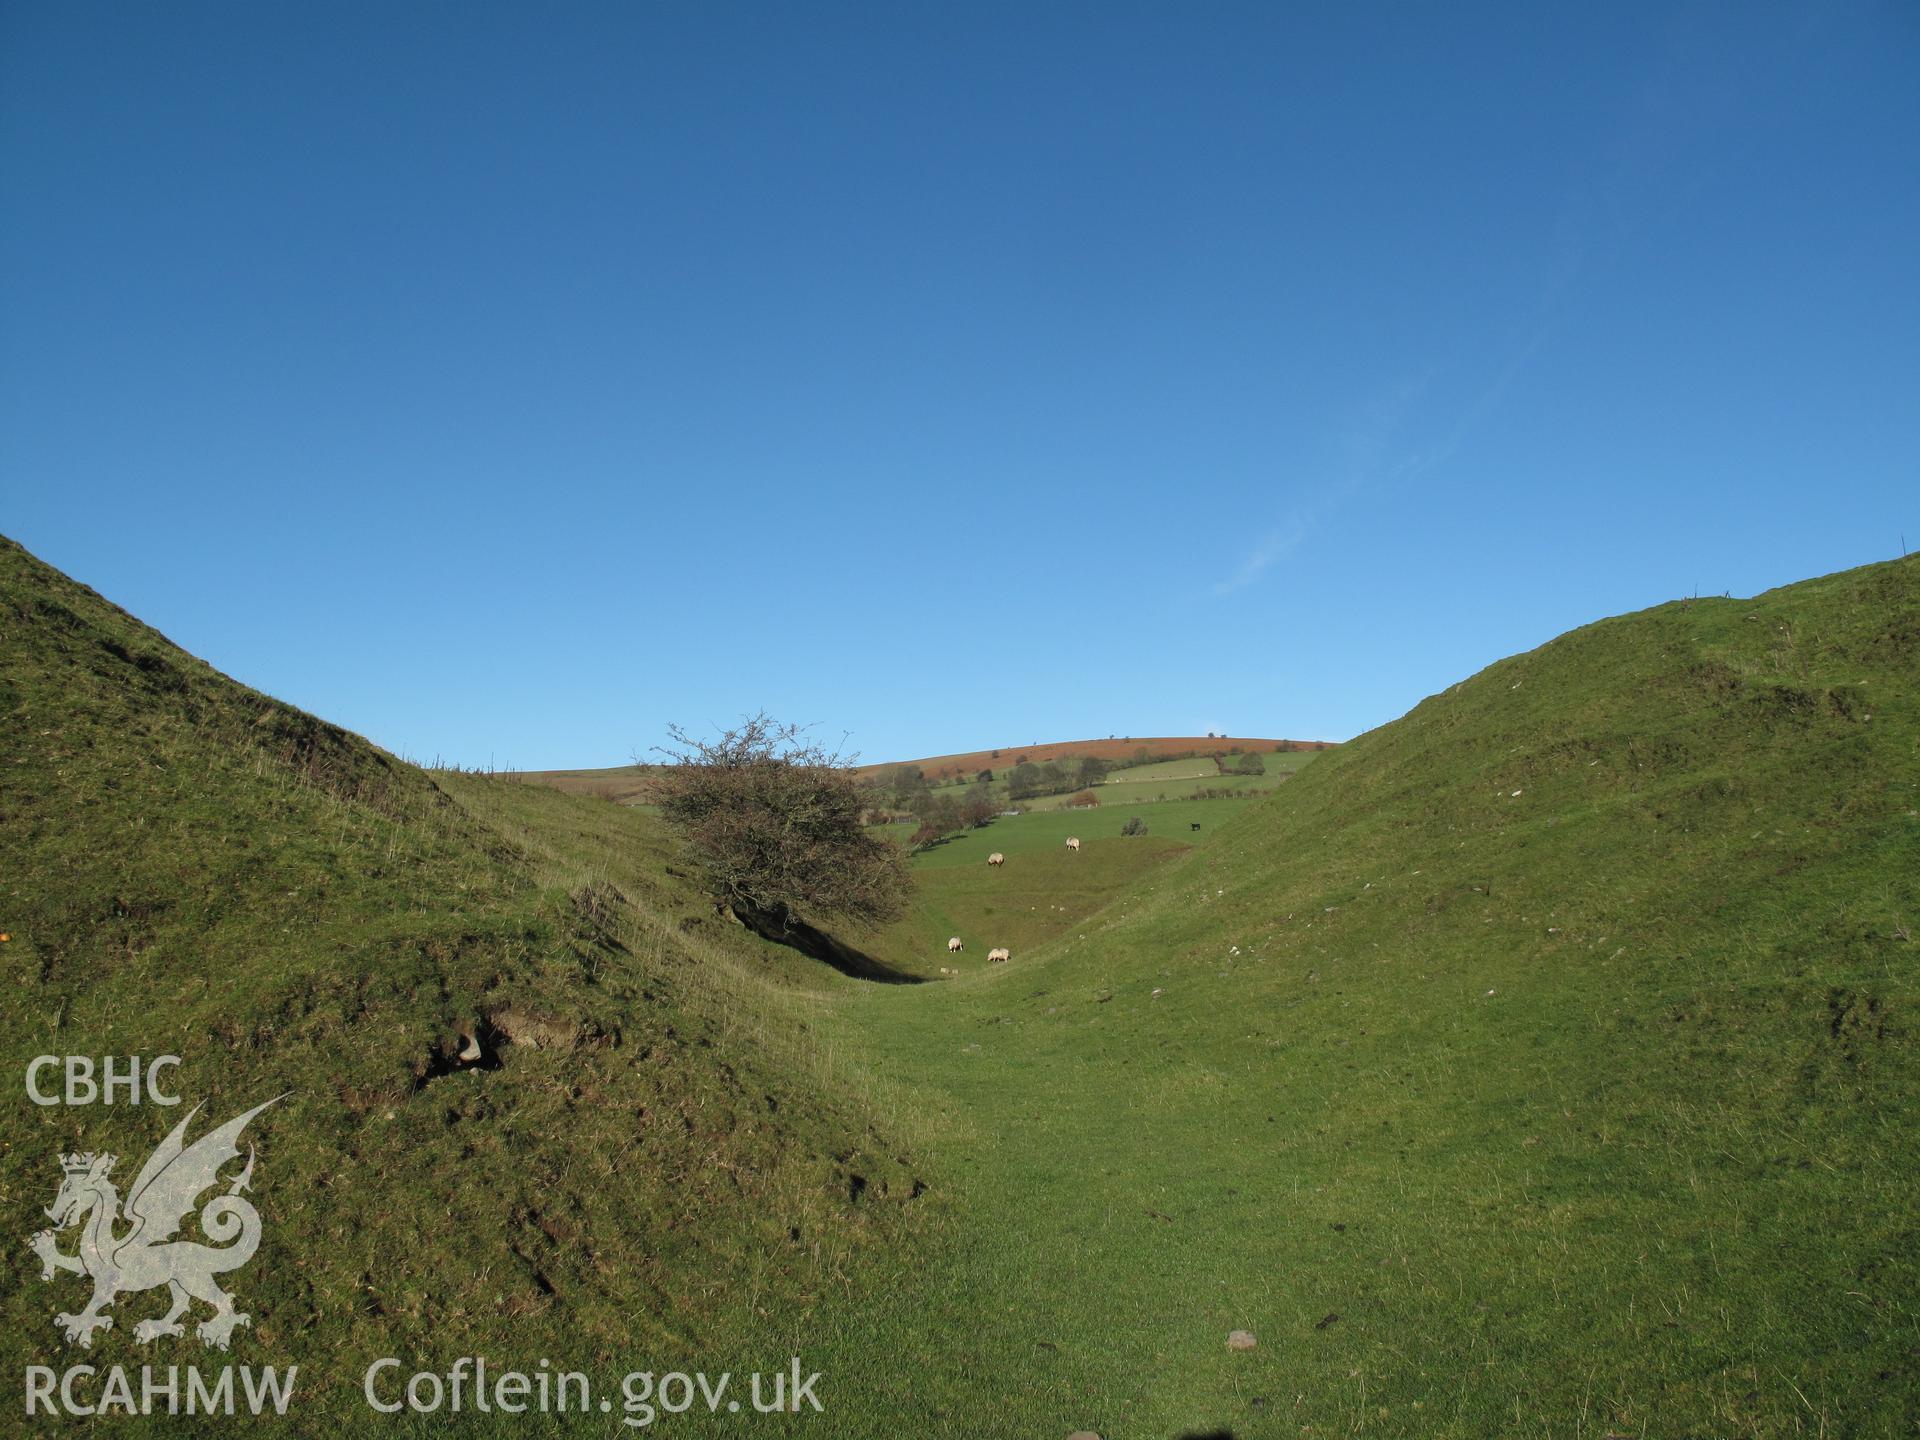 Painscastle west ditch from the south, taken by Brian Malaws on 15 November 2010.